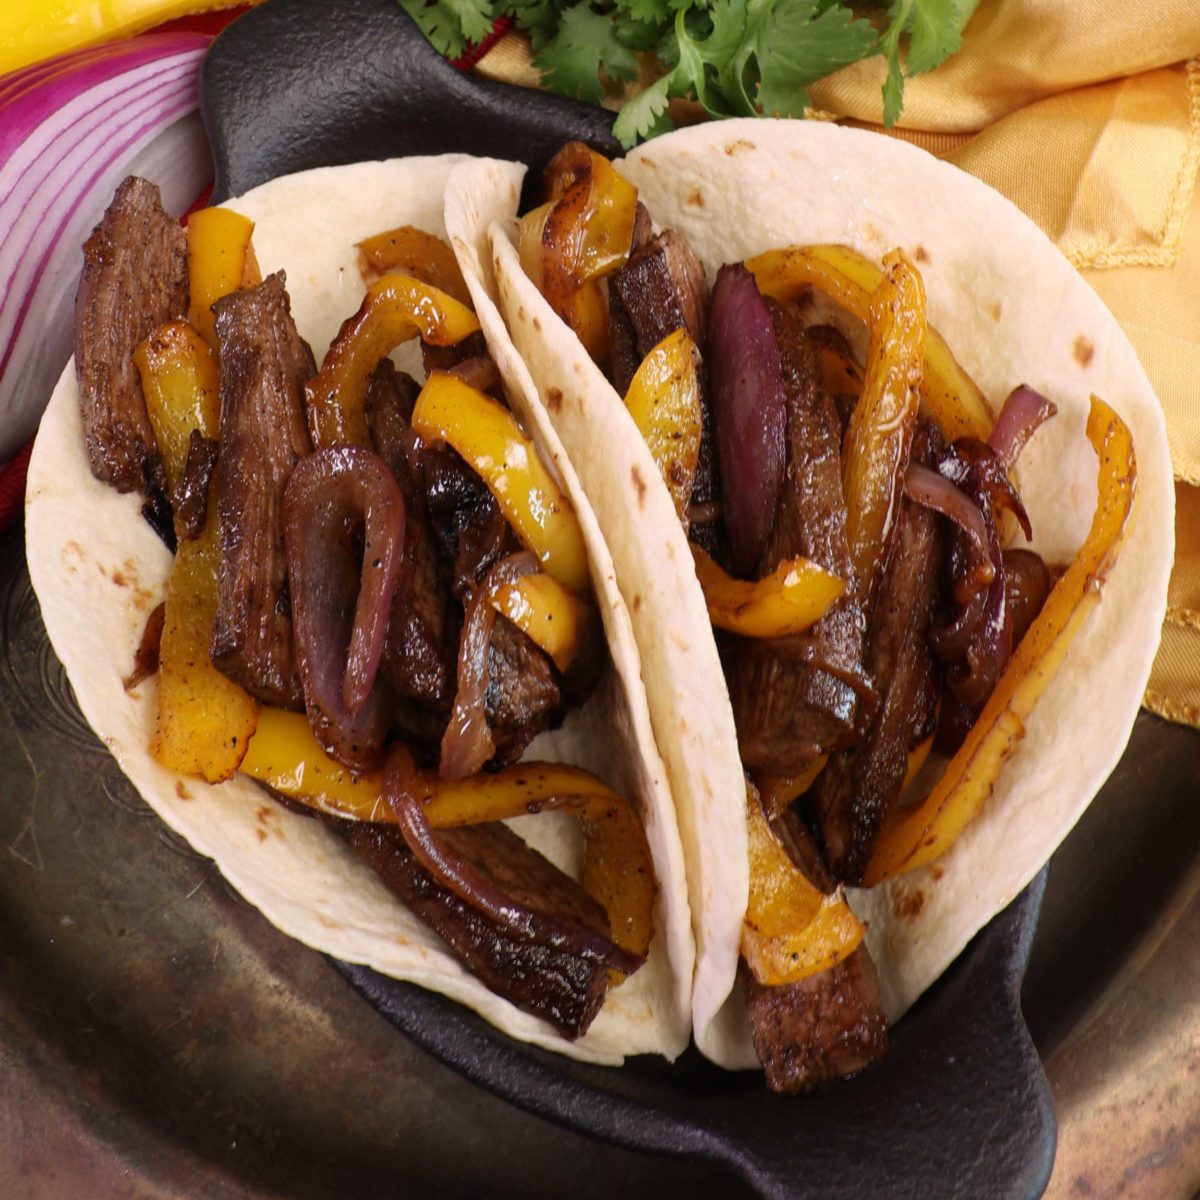 two flour tortillas filled with steak and vegetables.